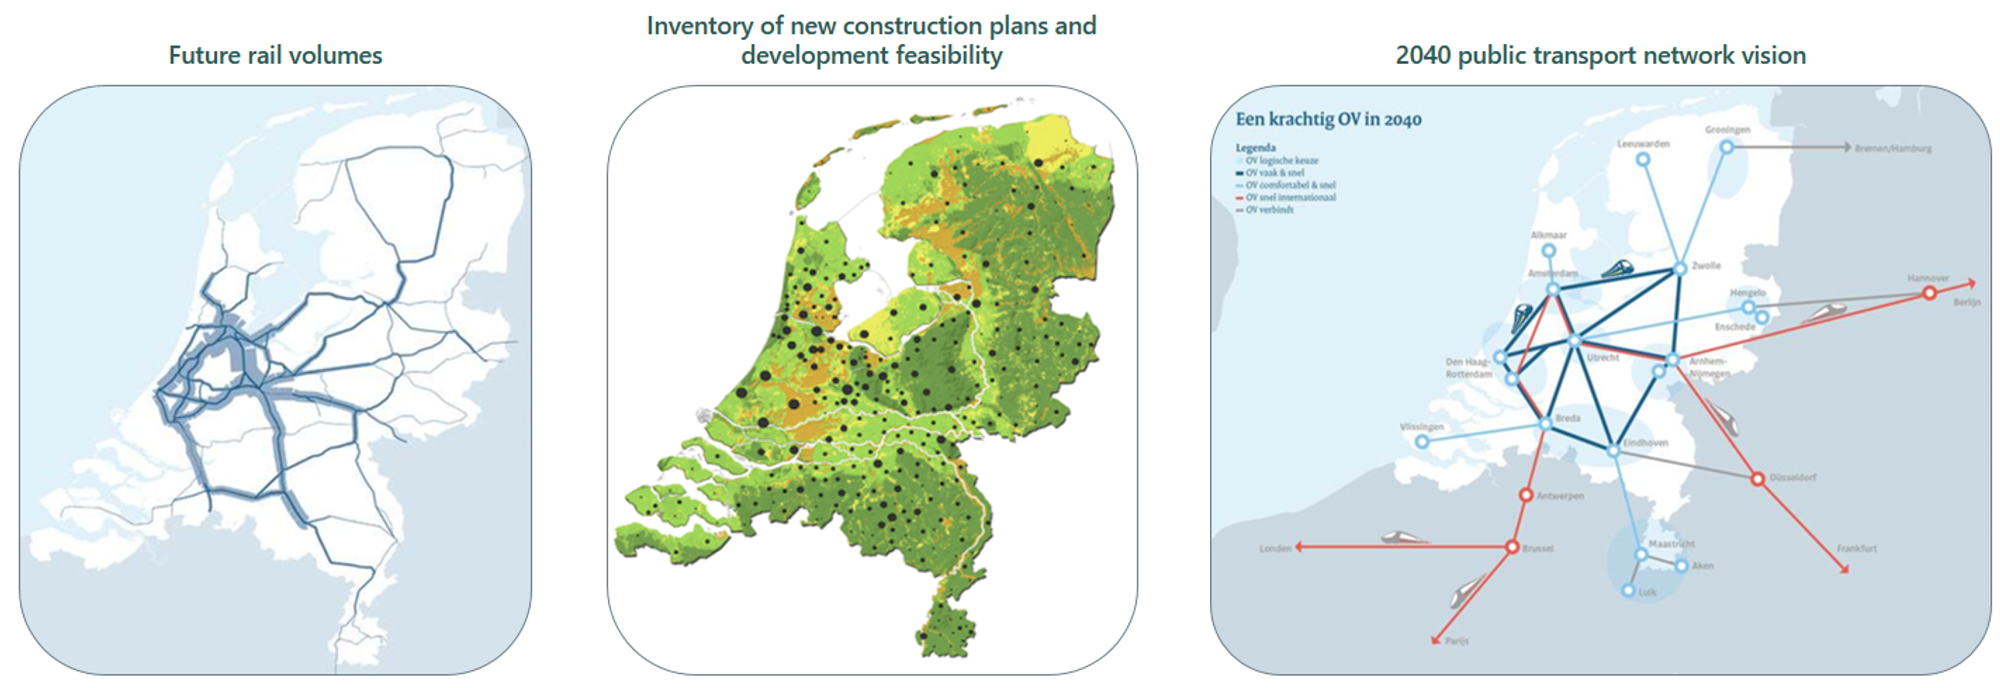 Maps showing the future railway of the Netherlands.